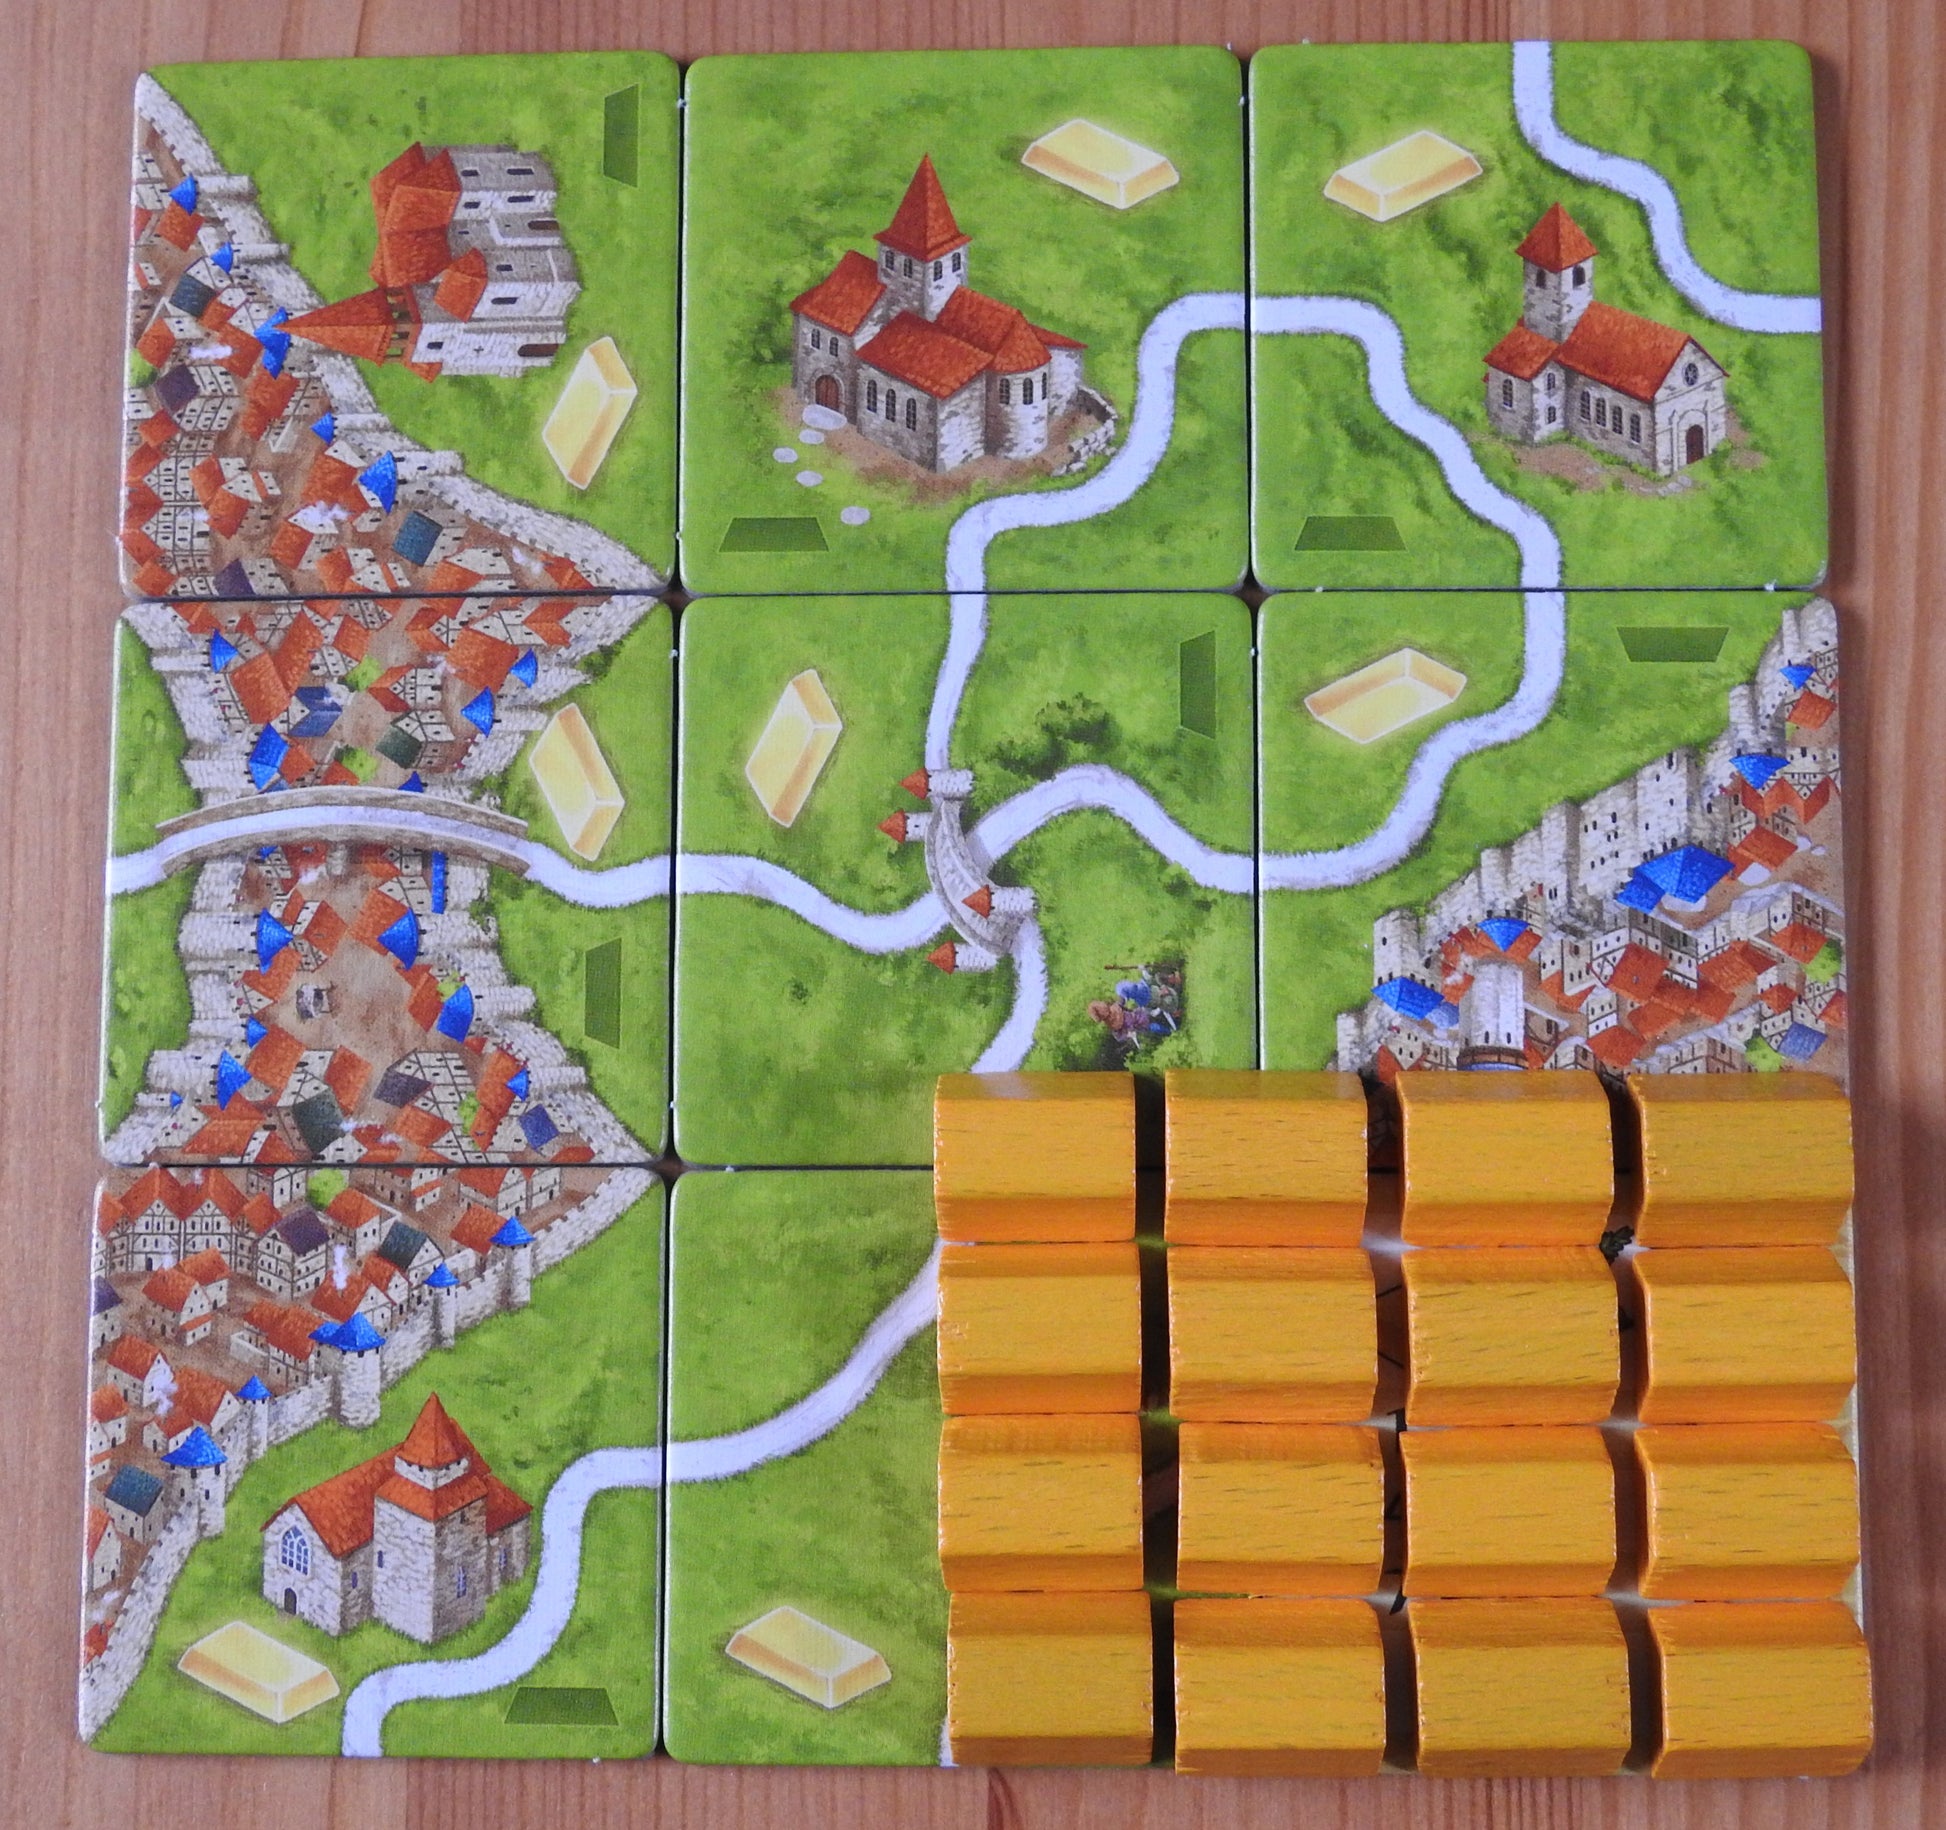 View of all the landscape tiles and wooden gold bar pieces featured in this Carcassonne Gold Mines expansion.